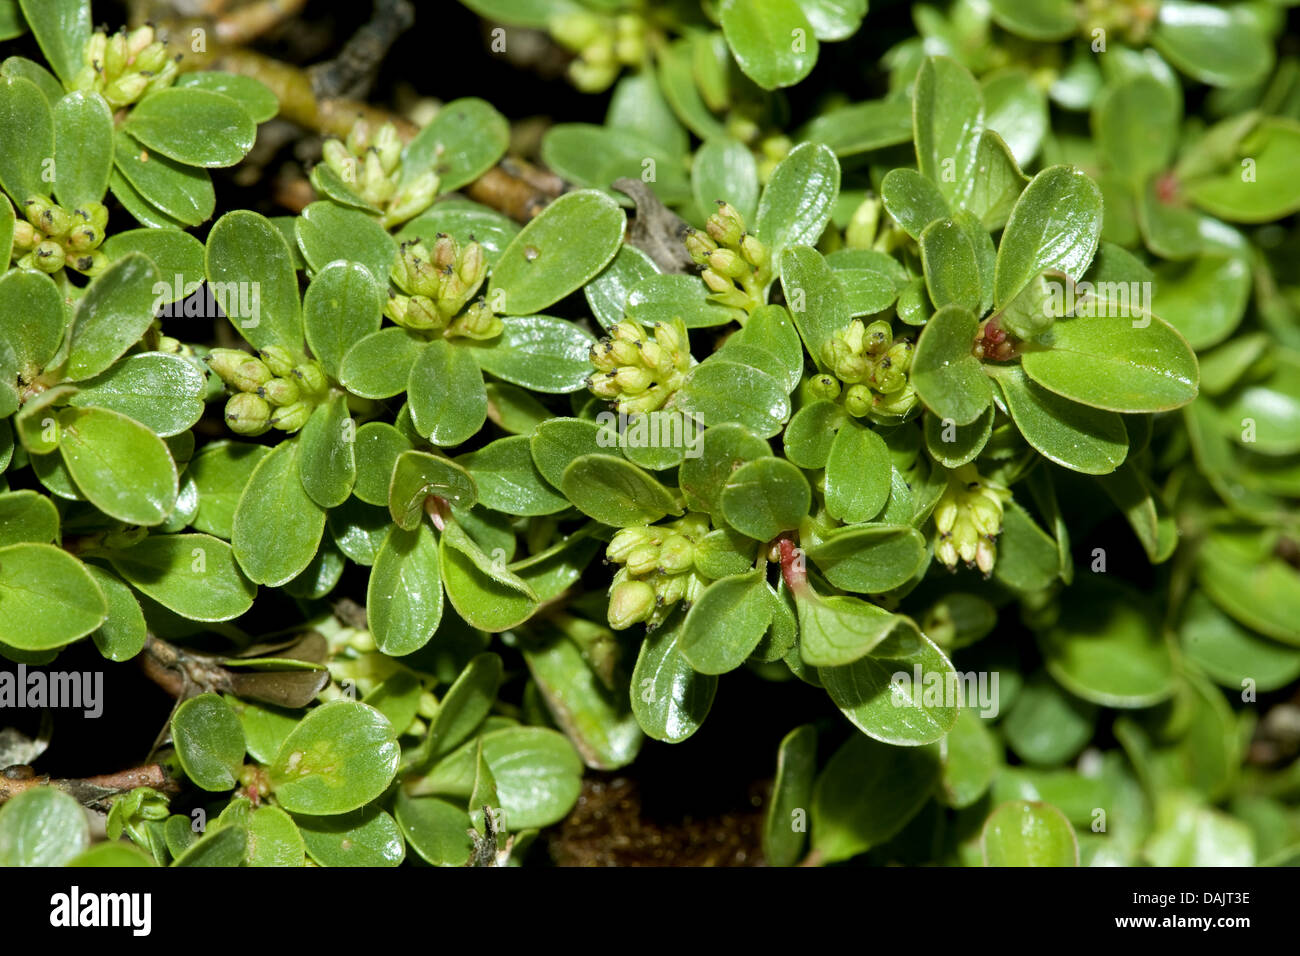 Thyme leaved willow (Salix serpyllifolia), branches with inflorescences, Germany Stock Photo